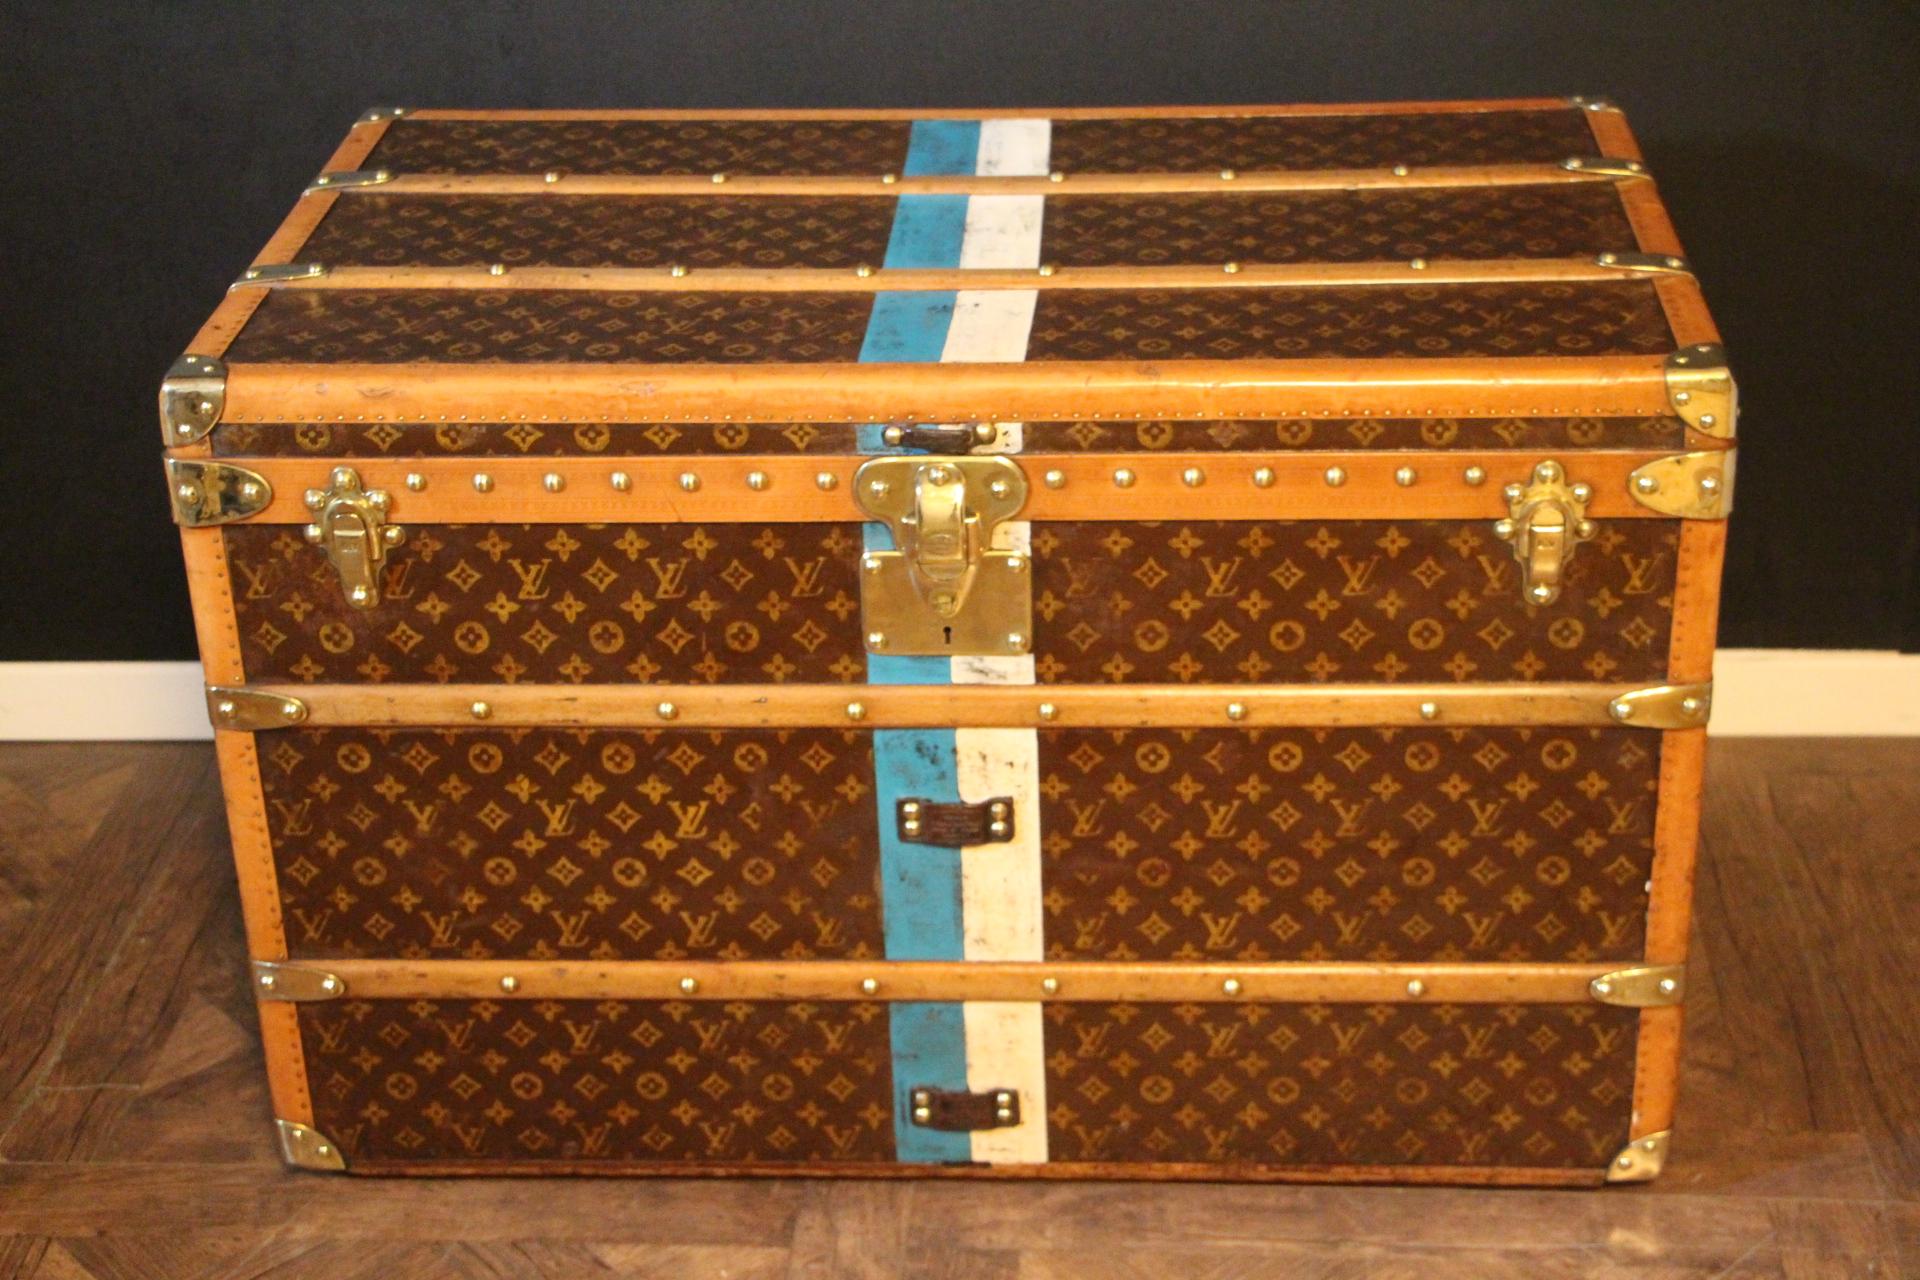 This superb Louis Vuitton steamer trunk features stenciled monogram canvas,honey color lozine trim, LV stamped solid brass locks and studs as well as leather side handles and brass corners. It has got a beautiful original patina and is very